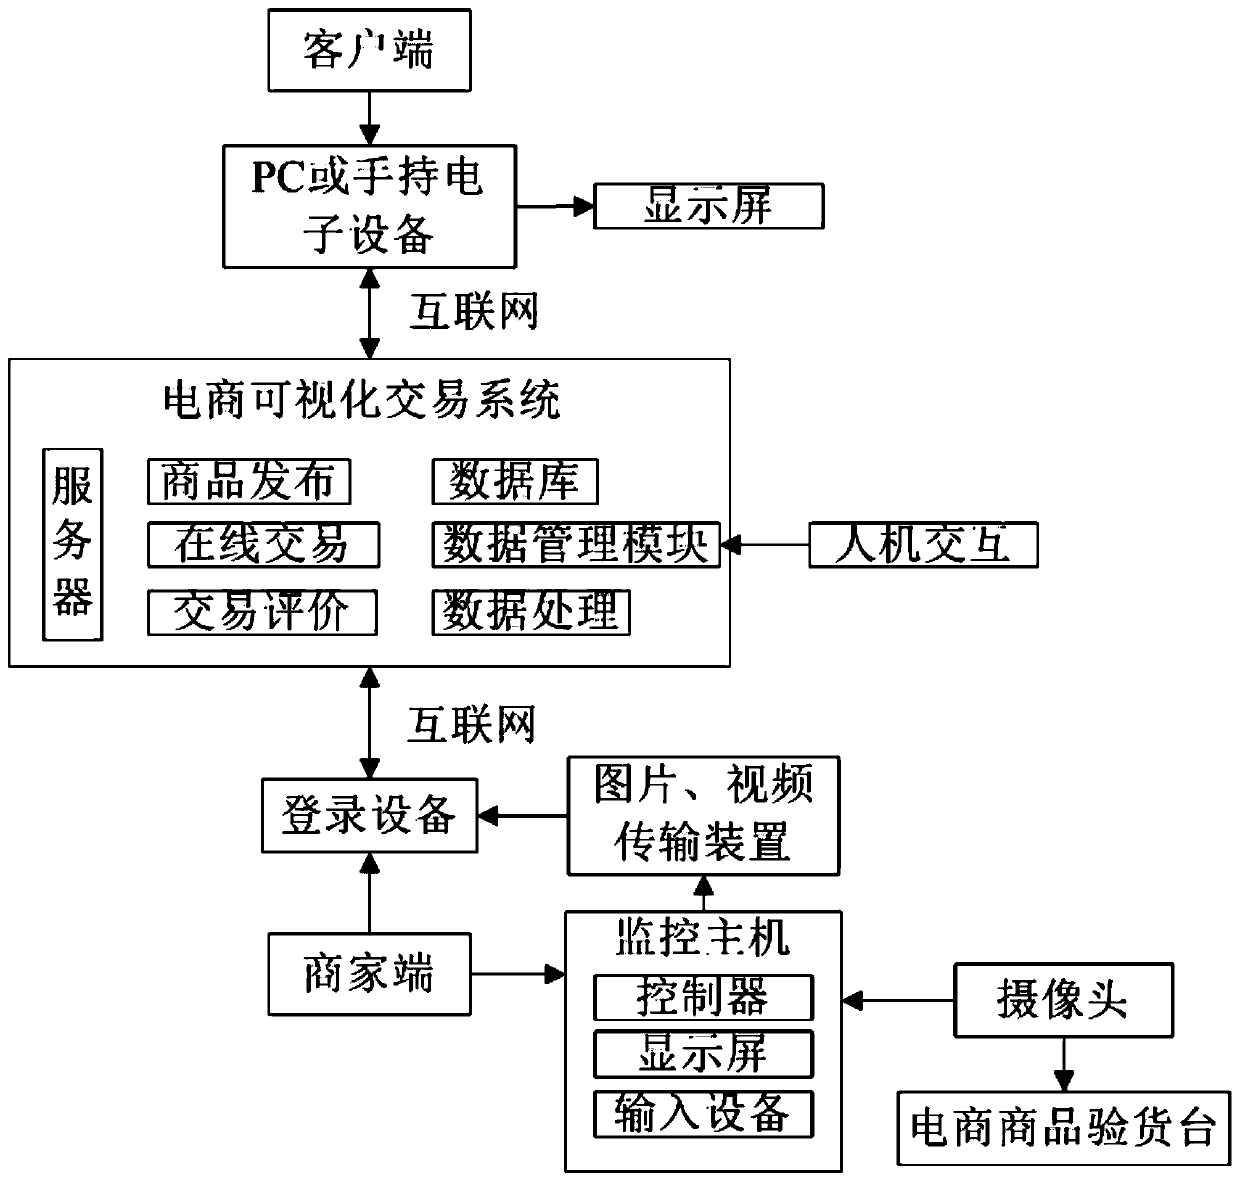 E-commerce product visual transaction system